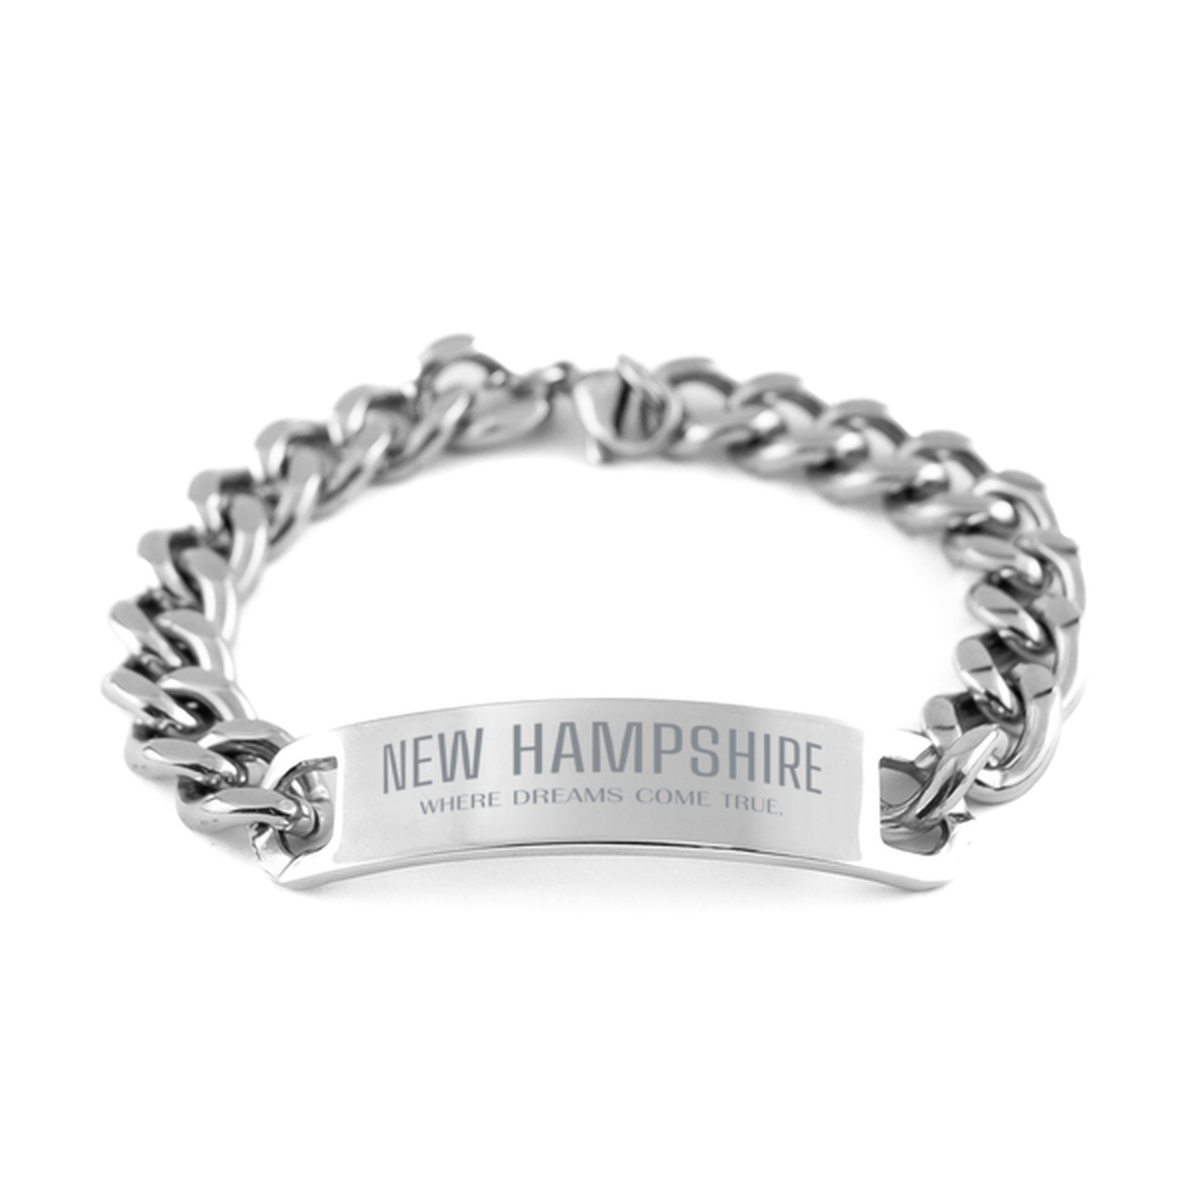 Love New Hampshire State Cuban Chain Stainless Steel Bracelet, New Hampshire Where dreams come true, Birthday Inspirational Gifts For New Hampshire Men, Women, Friends